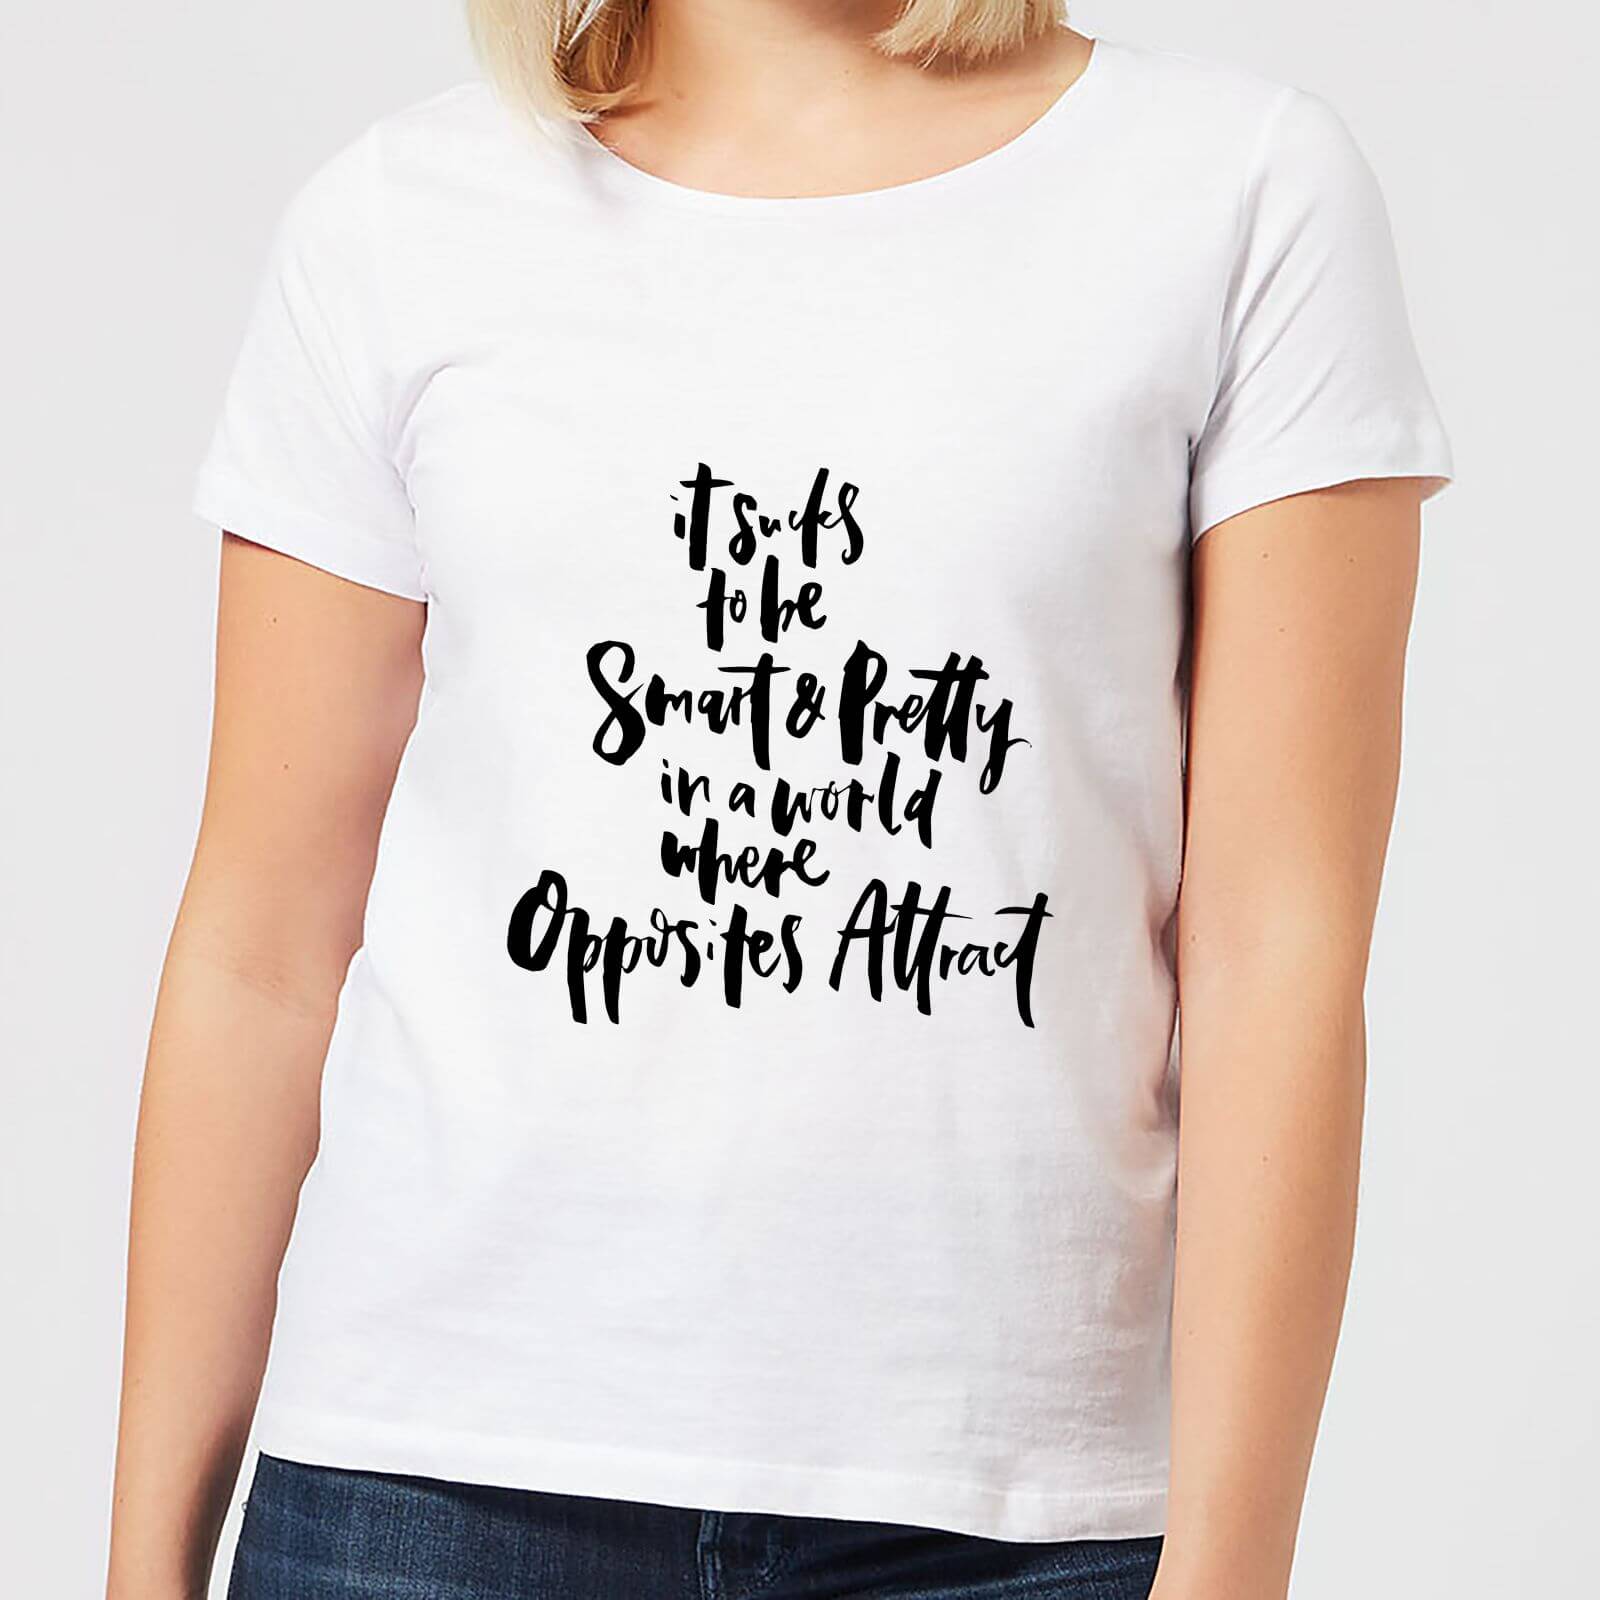 It Sucks To Be Smart and Pretty In A World Where Opposites Attract Women's T-Shirt - White - XL - White